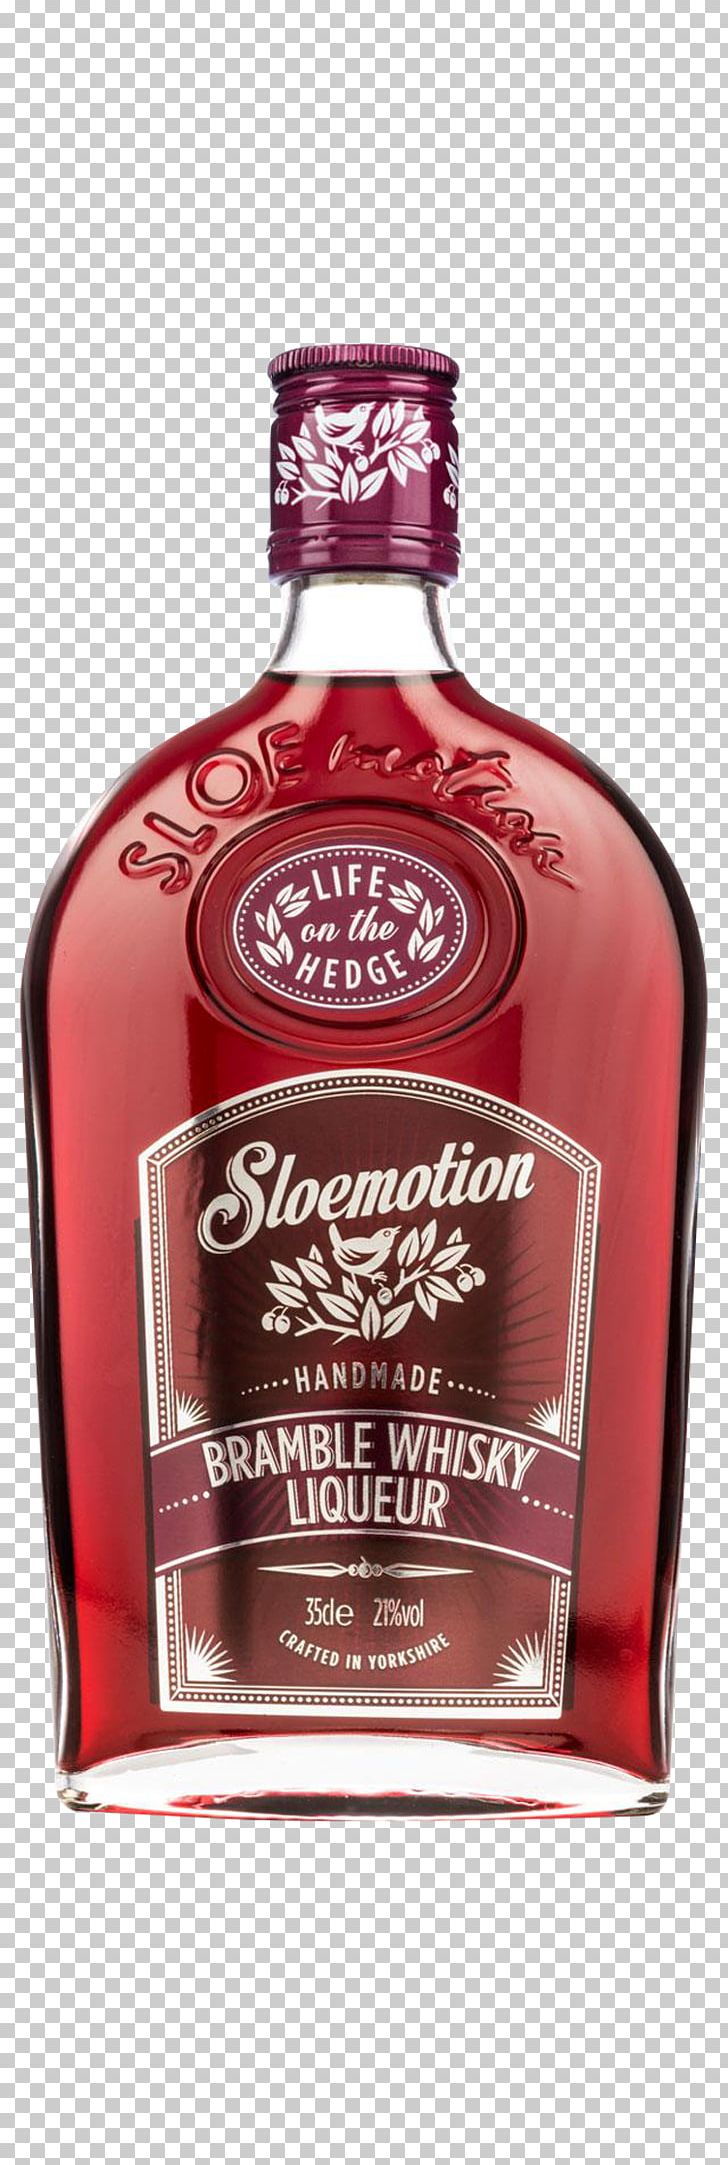 Tennessee Whiskey Liqueur Liquor Gin PNG, Clipart, Alcoholic Beverage, Blackthorn, Bottle, Bramble, Damson Gin Free PNG Download